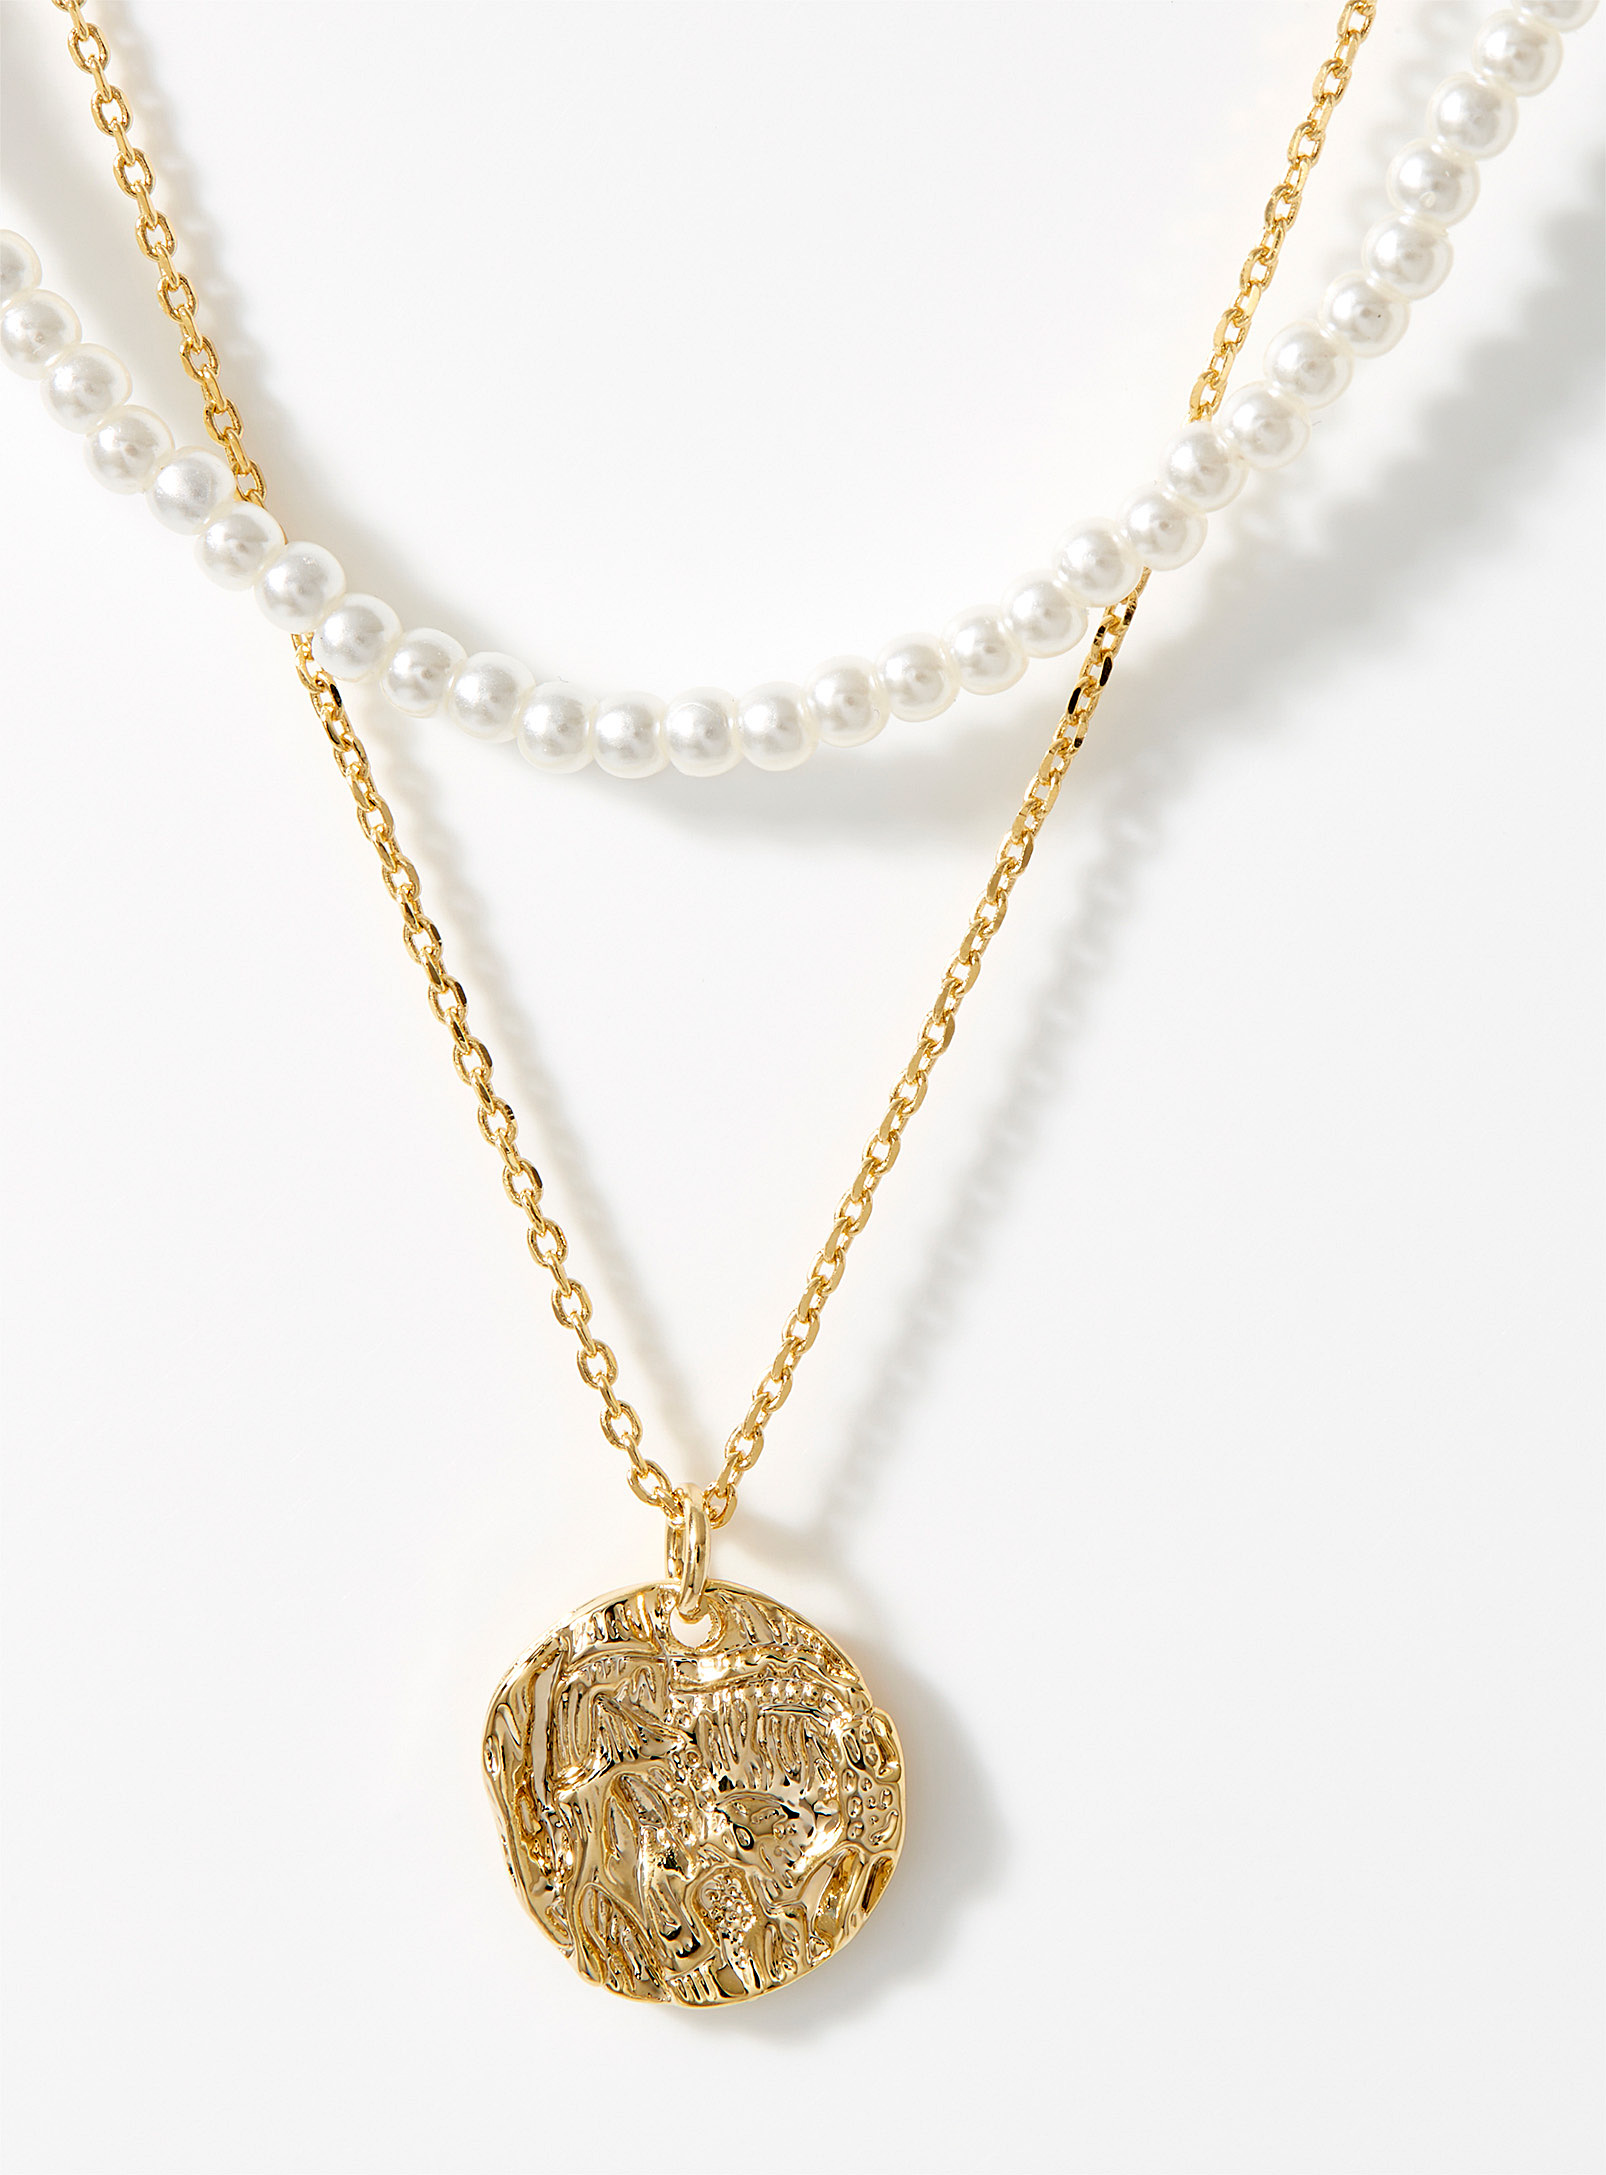 Simons - Women's Pearly bead and gold medallion chains Set of 2